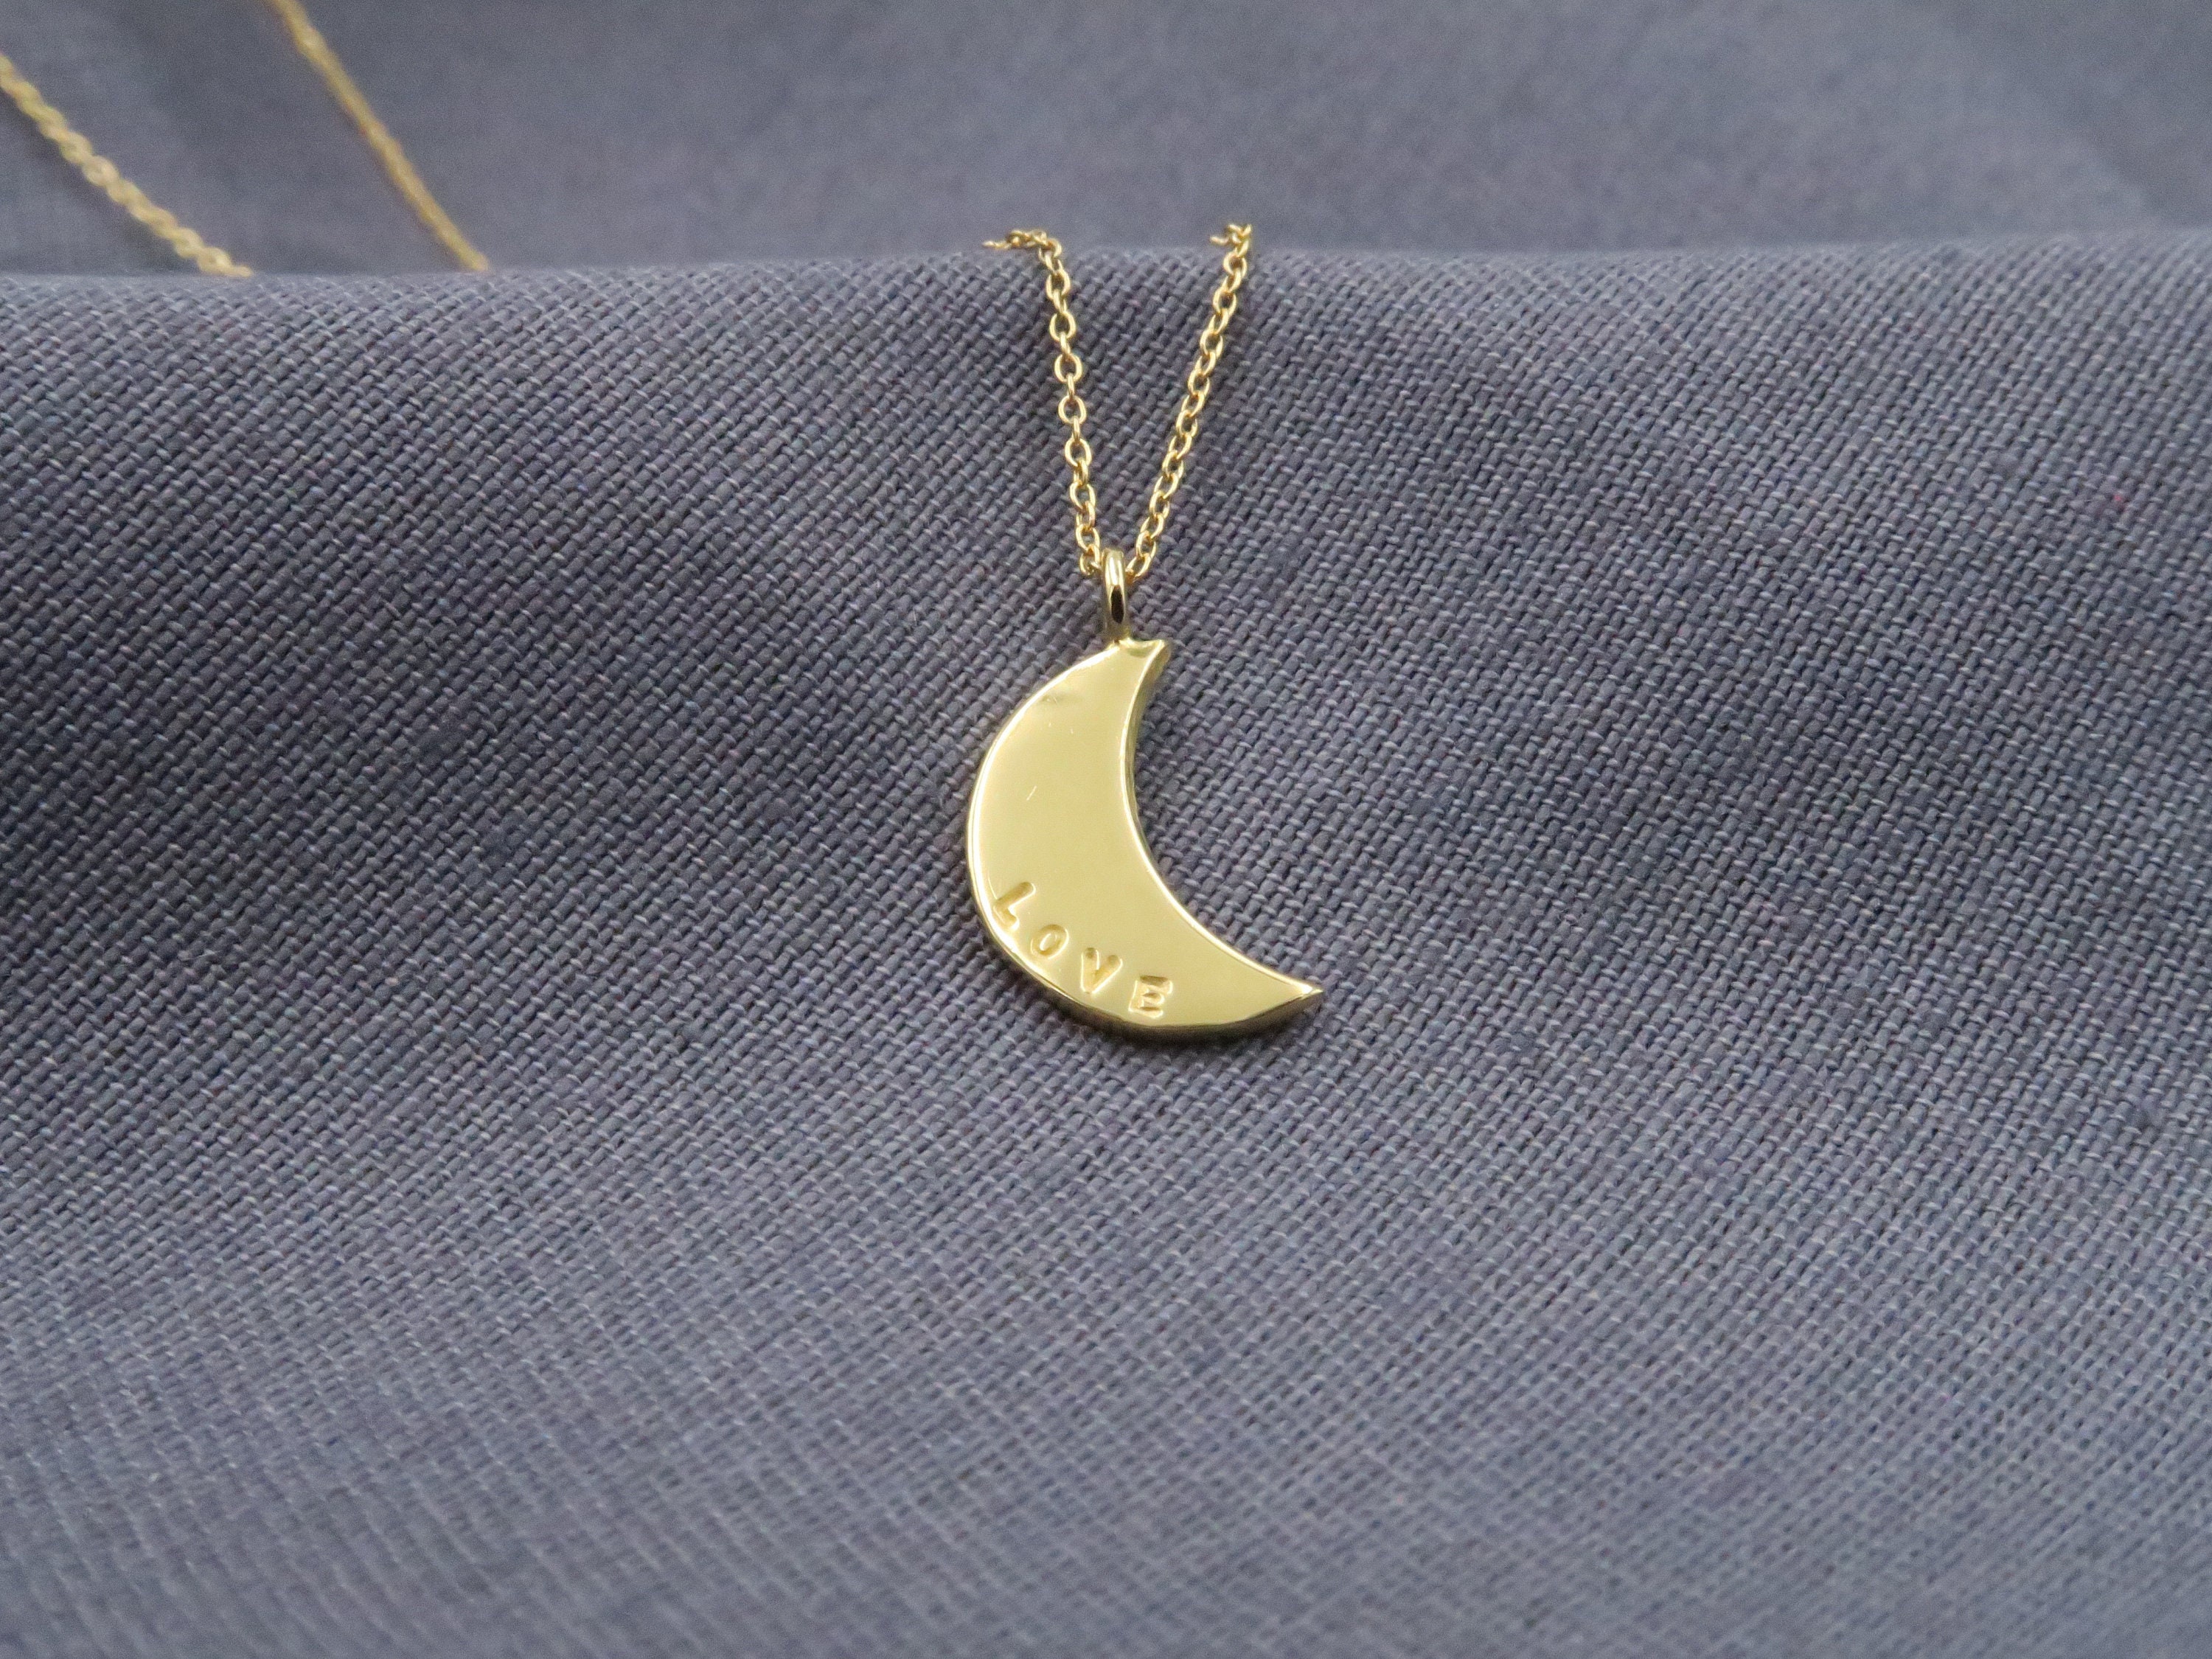 18k Gold Filled Small Crescent Moon Pendant Necklace